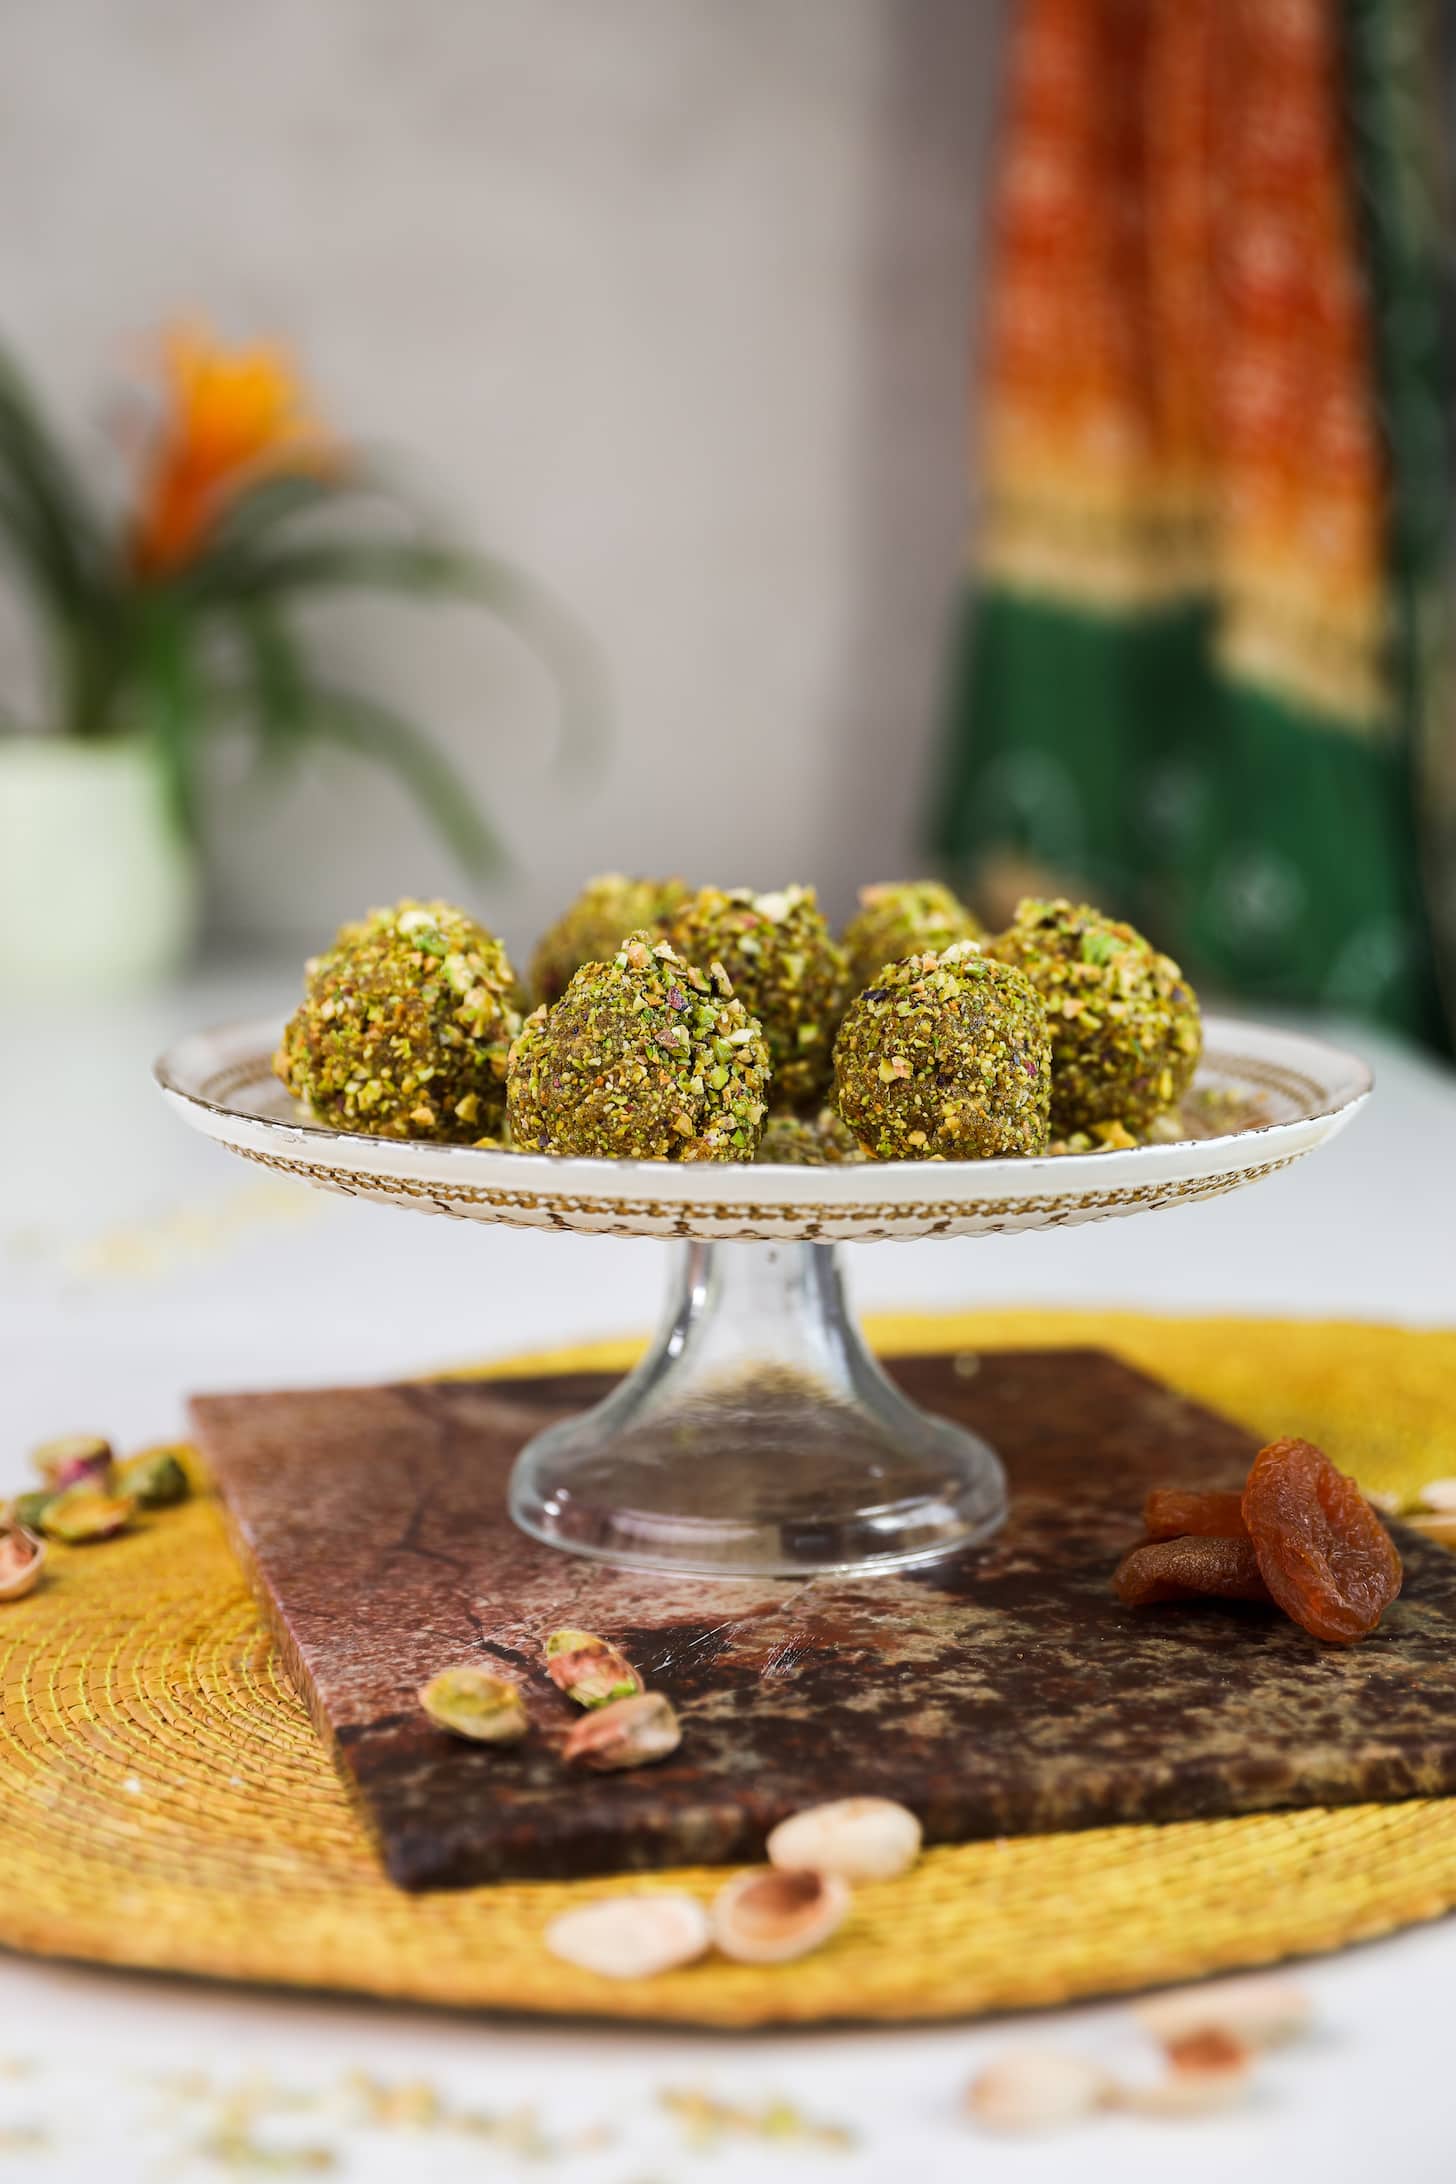 Nut covered brown balls on a gold printed decorative cake holder with a decorative shawl and a plant in the background.